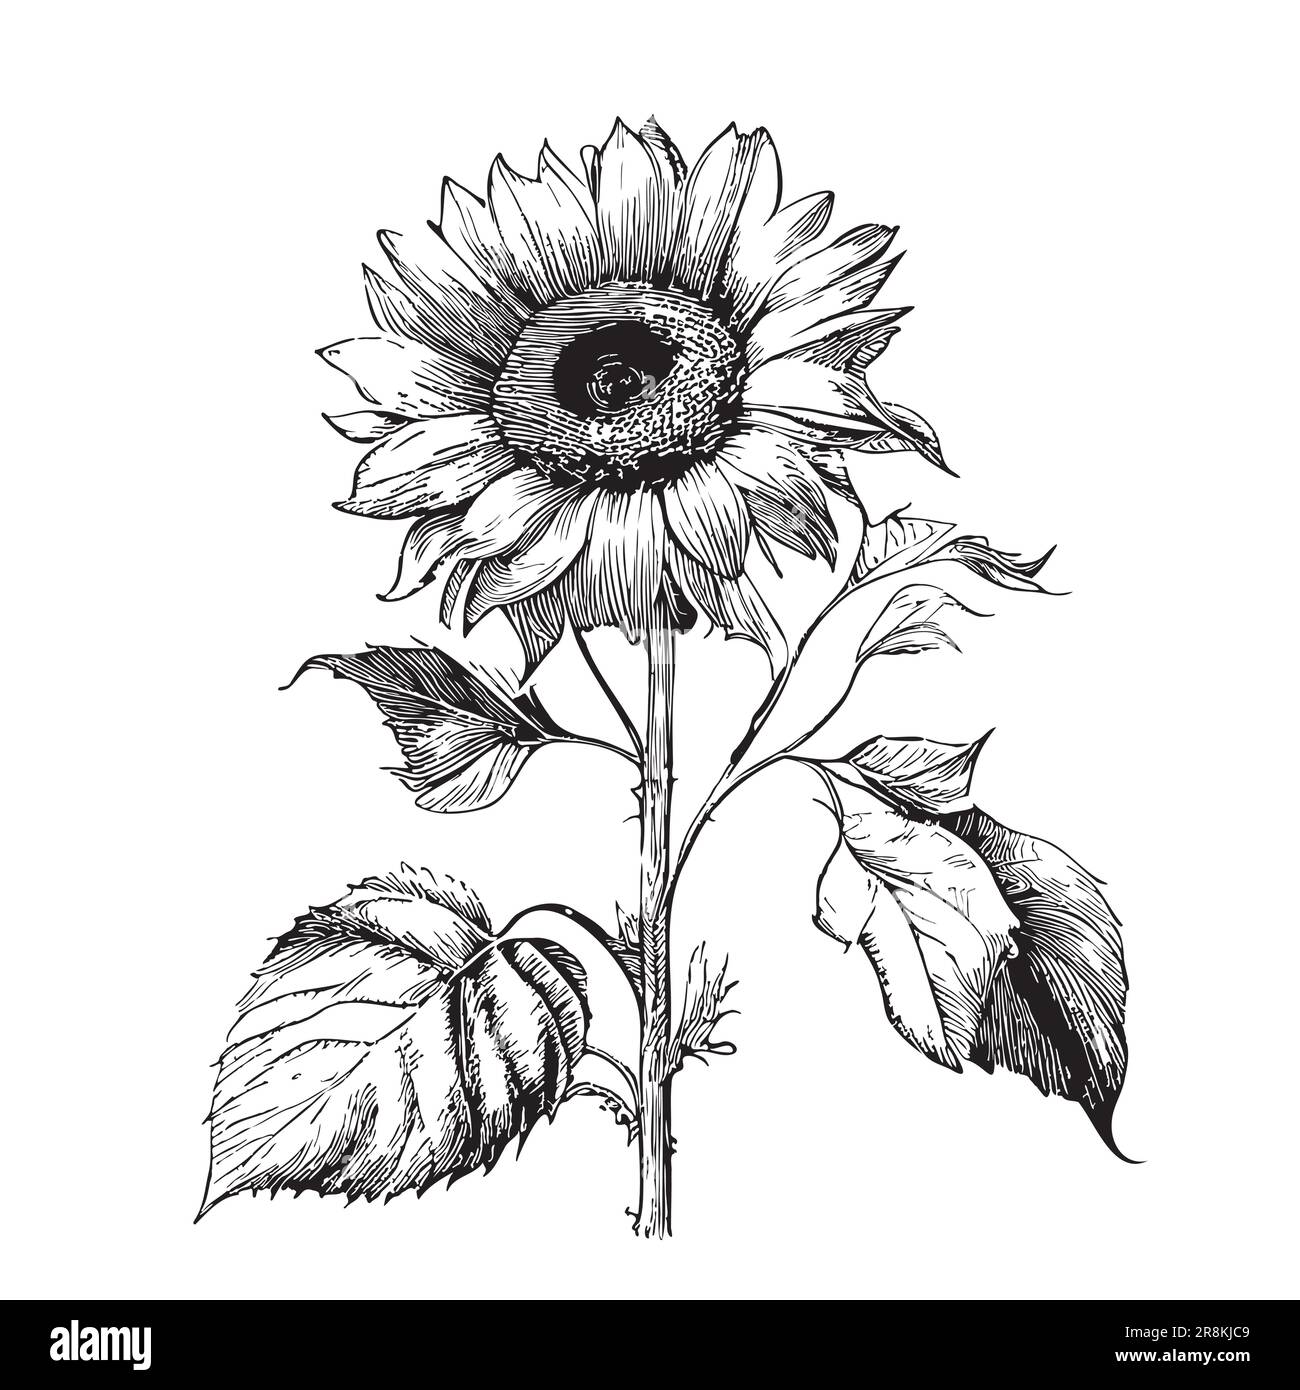 19 Sunflower Drawing Ideas for All Skill Levels  Beautiful Dawn Designs